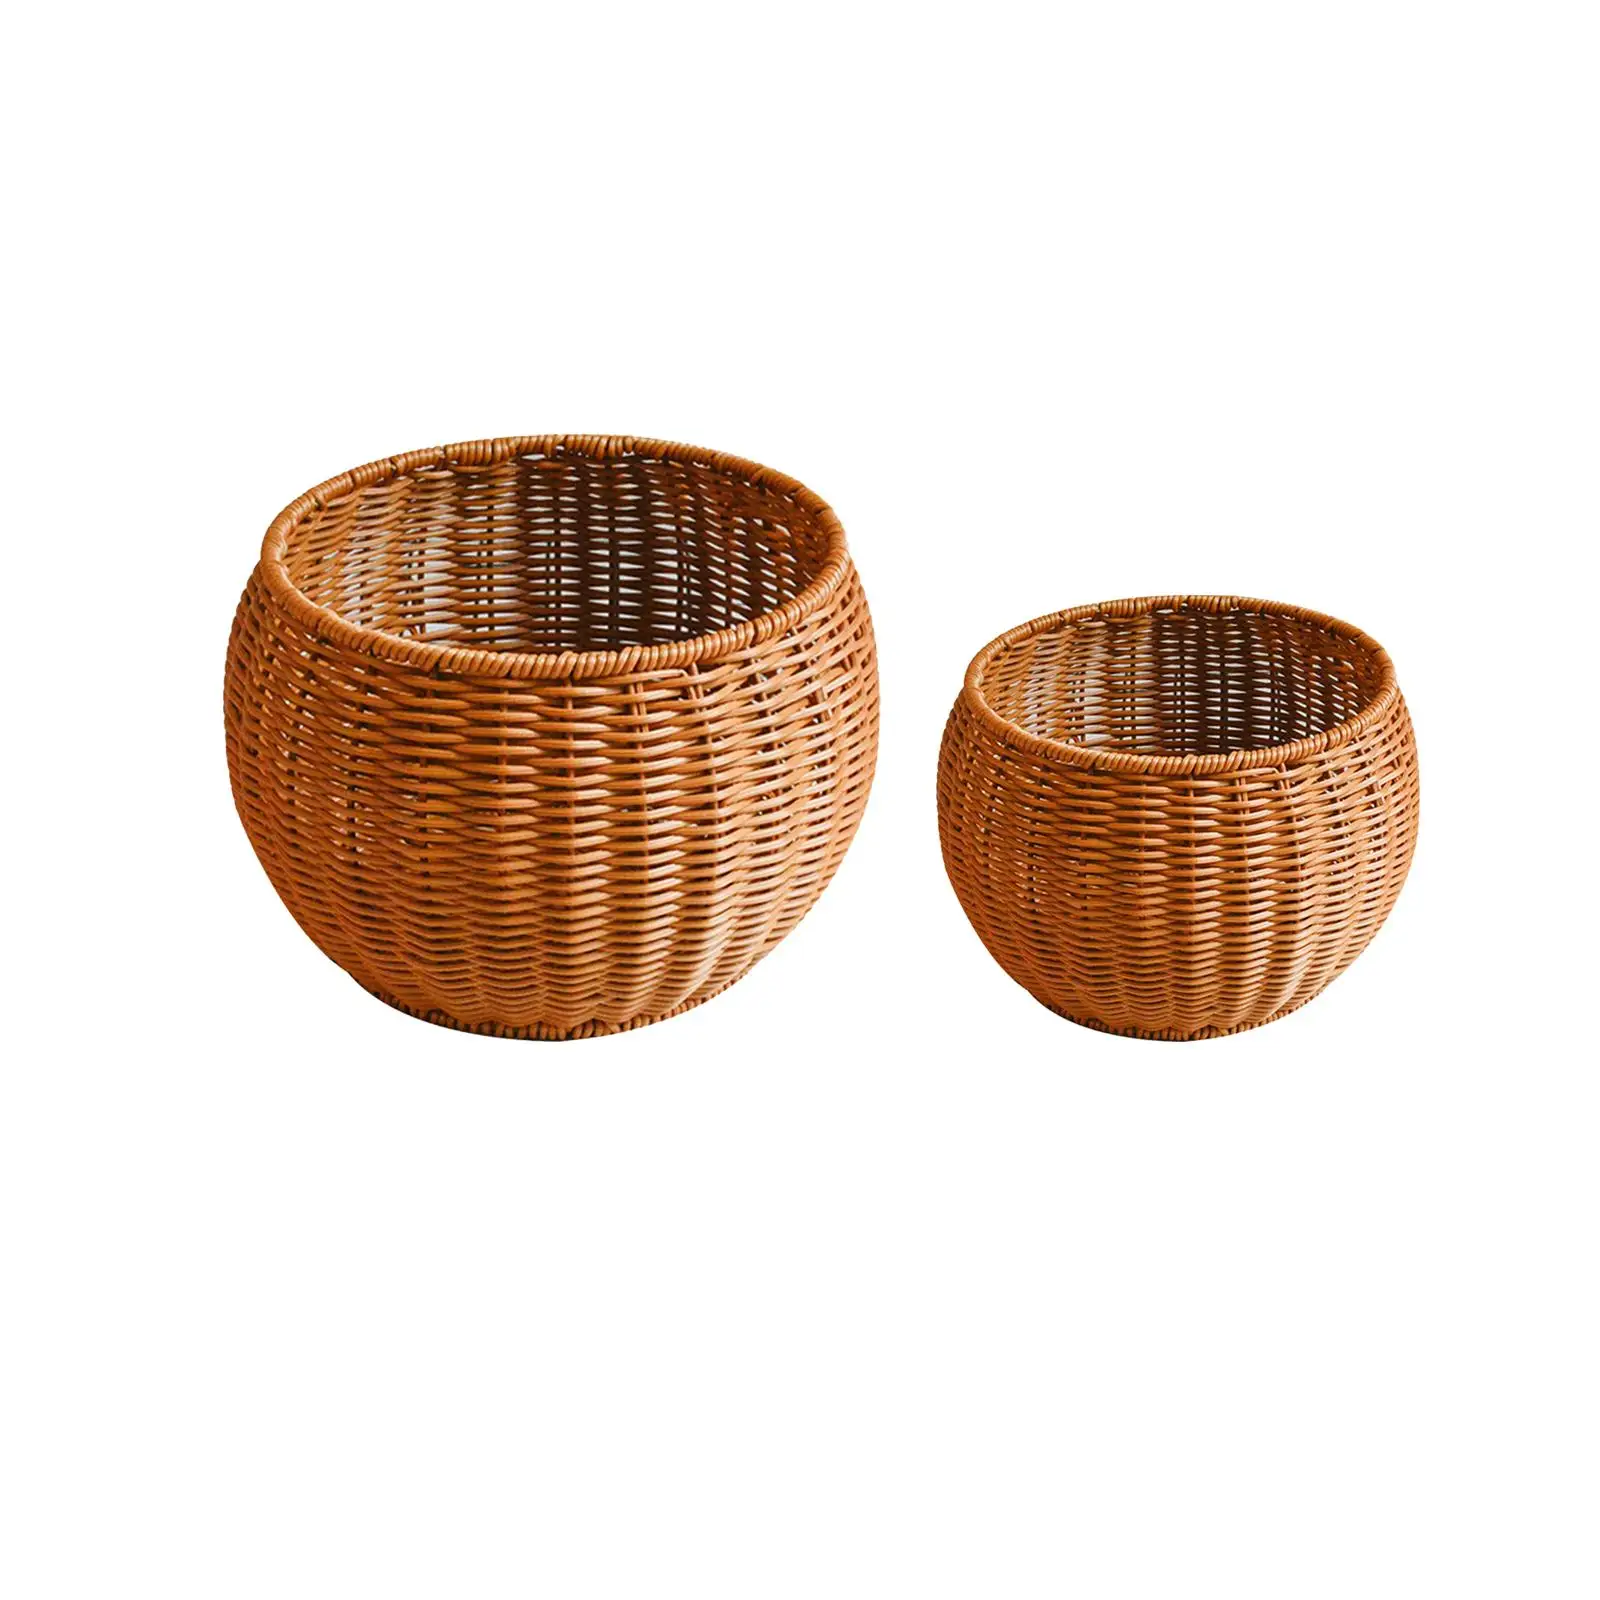 Imitation Rattan Tableware Tray Round Picnic Basket Woven Bread Baskets for Cabinet Countertops Shelves Cabinets Napkins